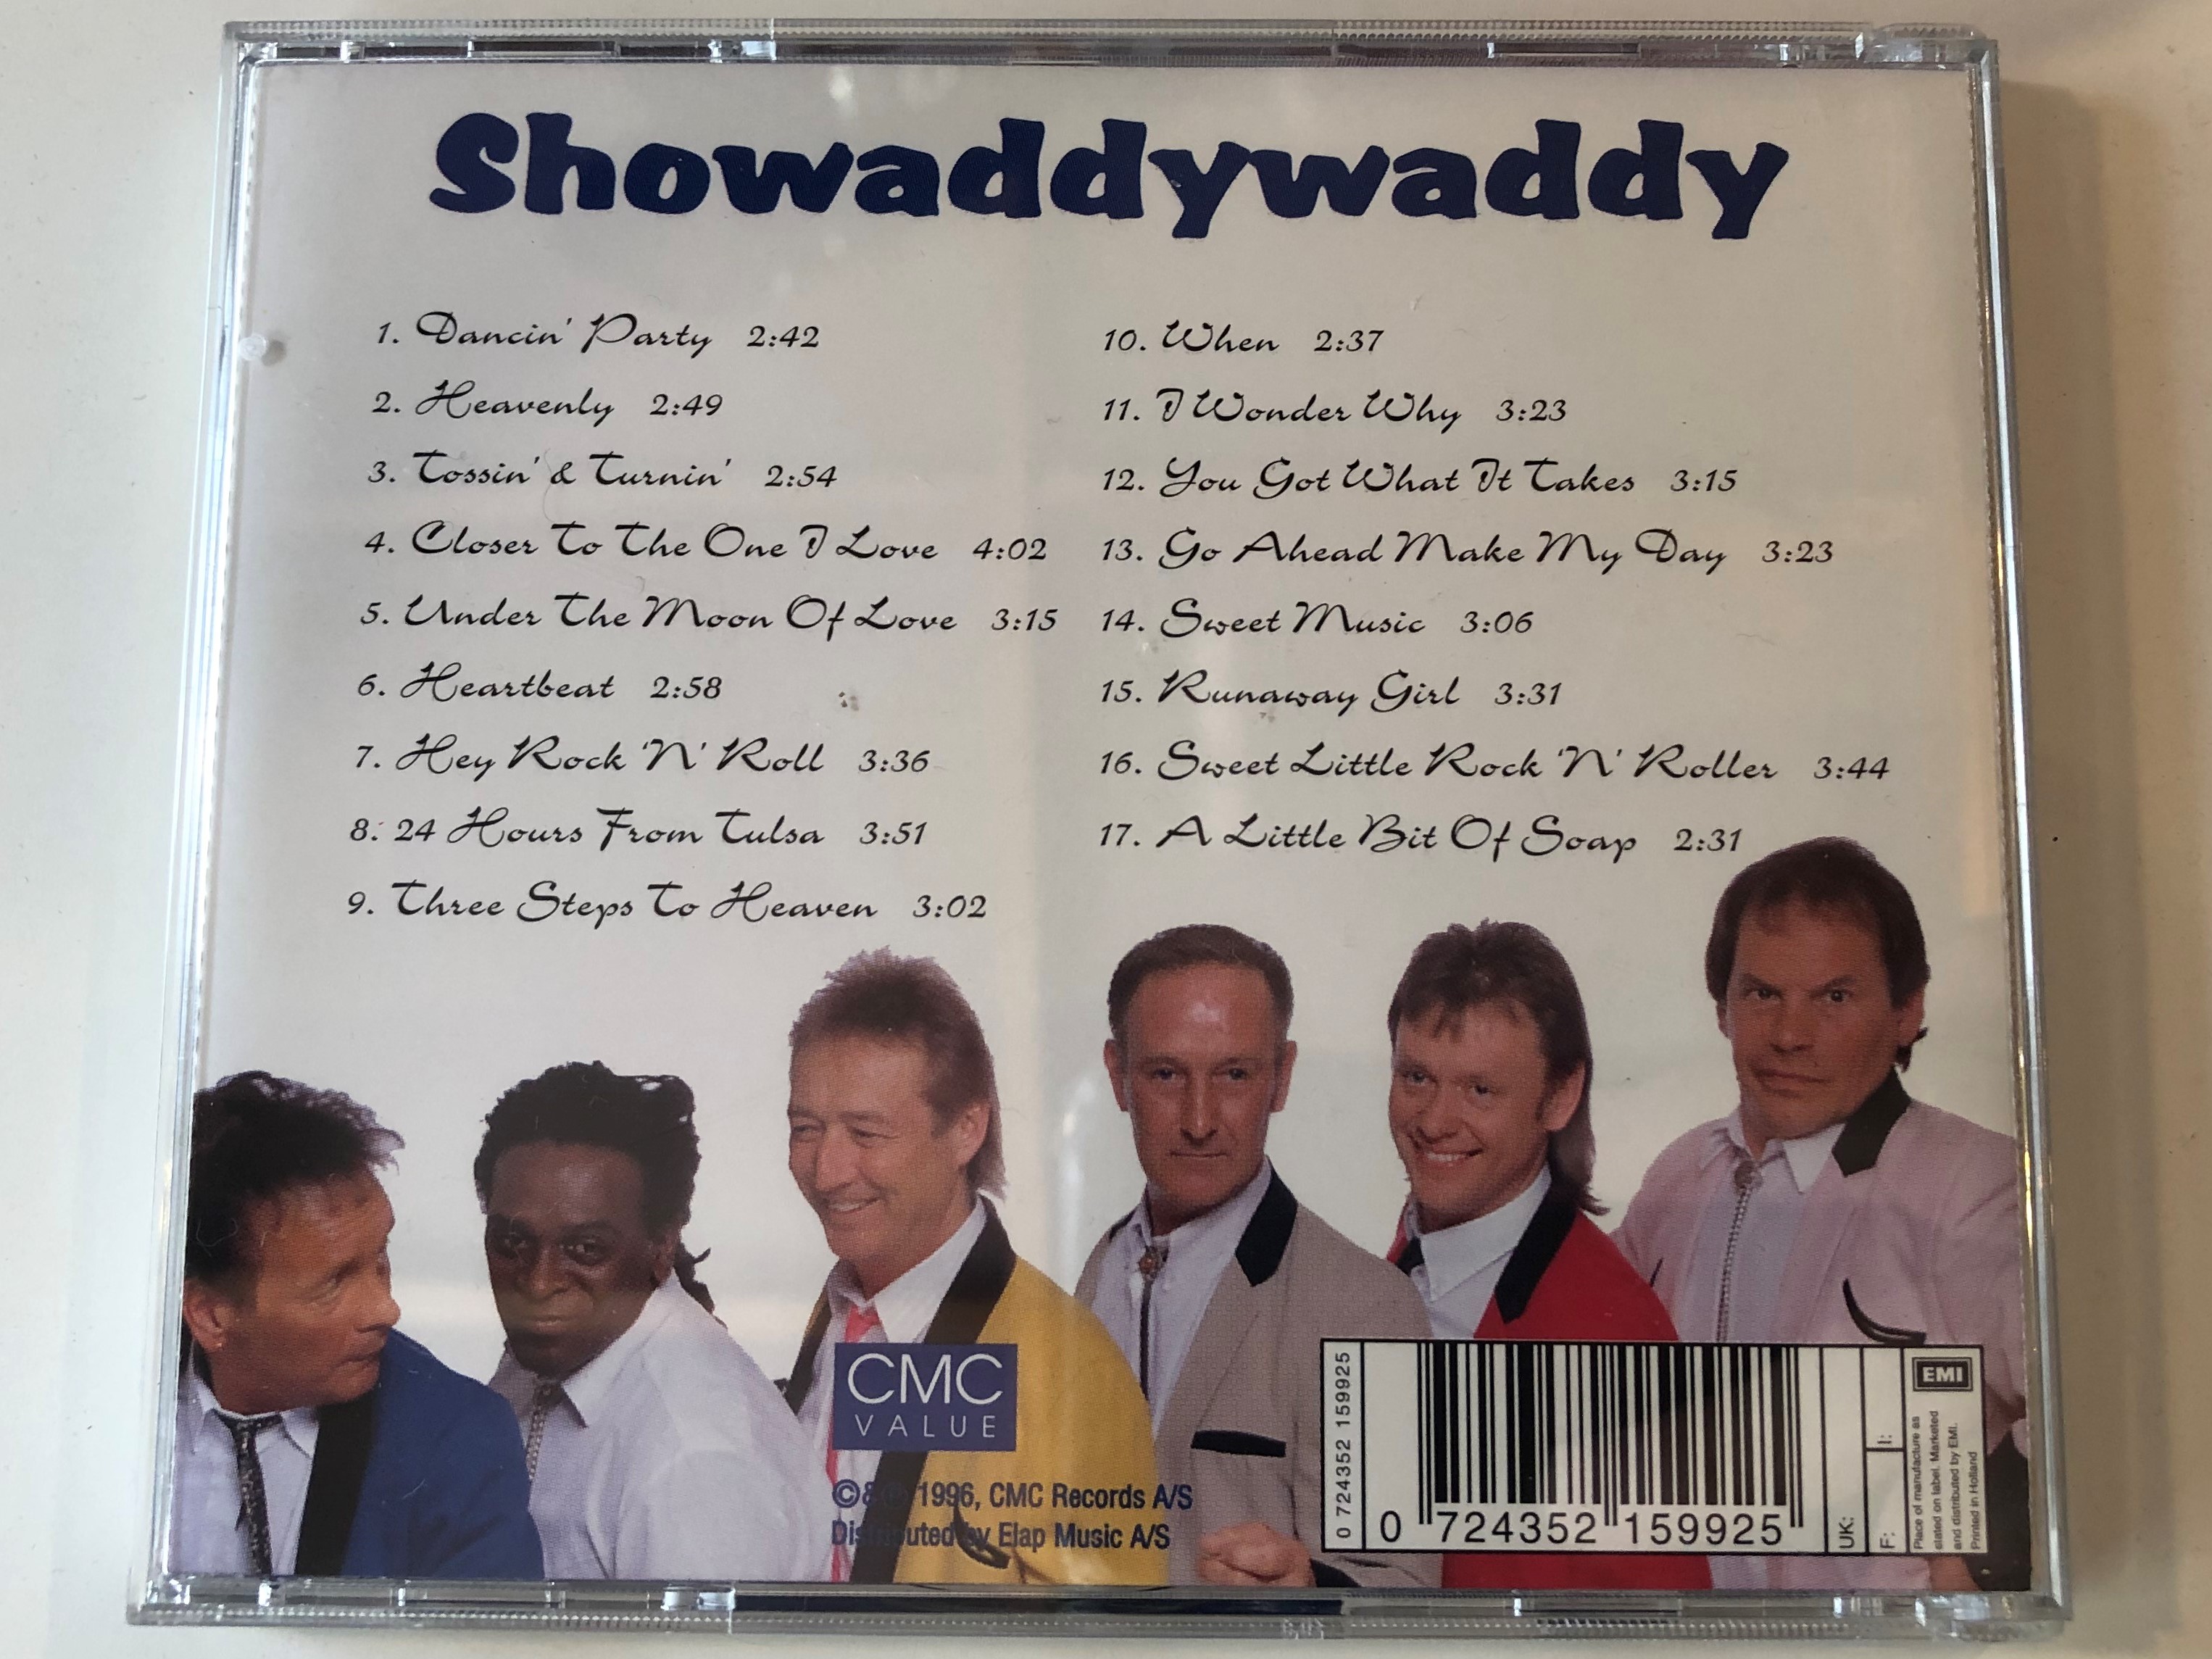 showaddywaddy-the-one-only.-greatest-latest-cmc-records-audio-cd-1996-0724352159925-2-.jpg